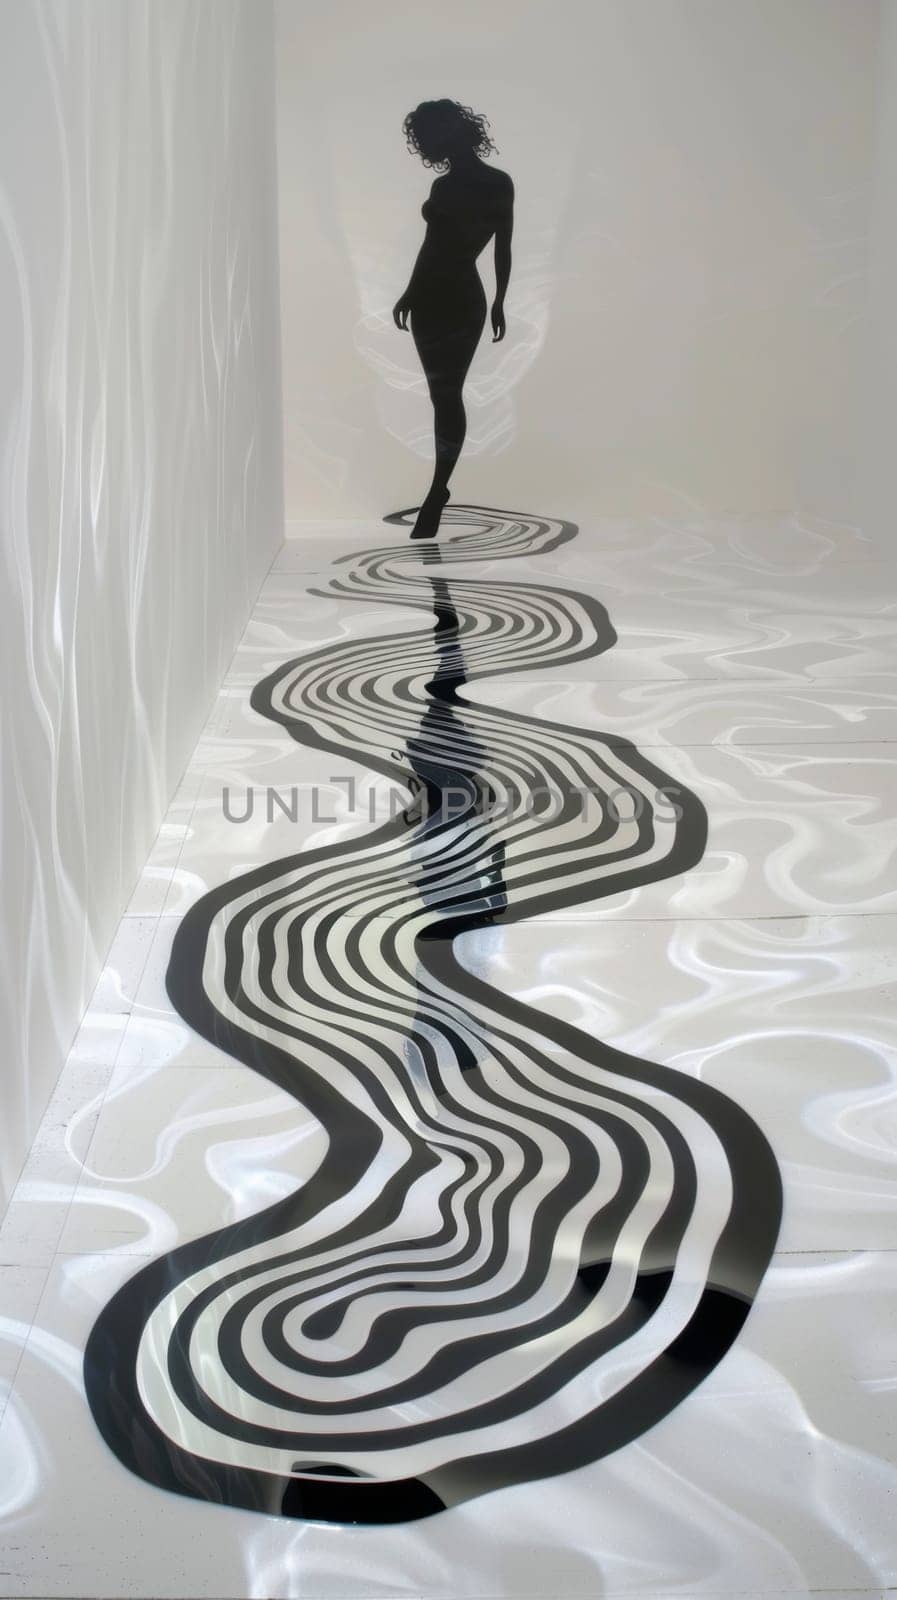 A woman walking on a black and white patterned floor